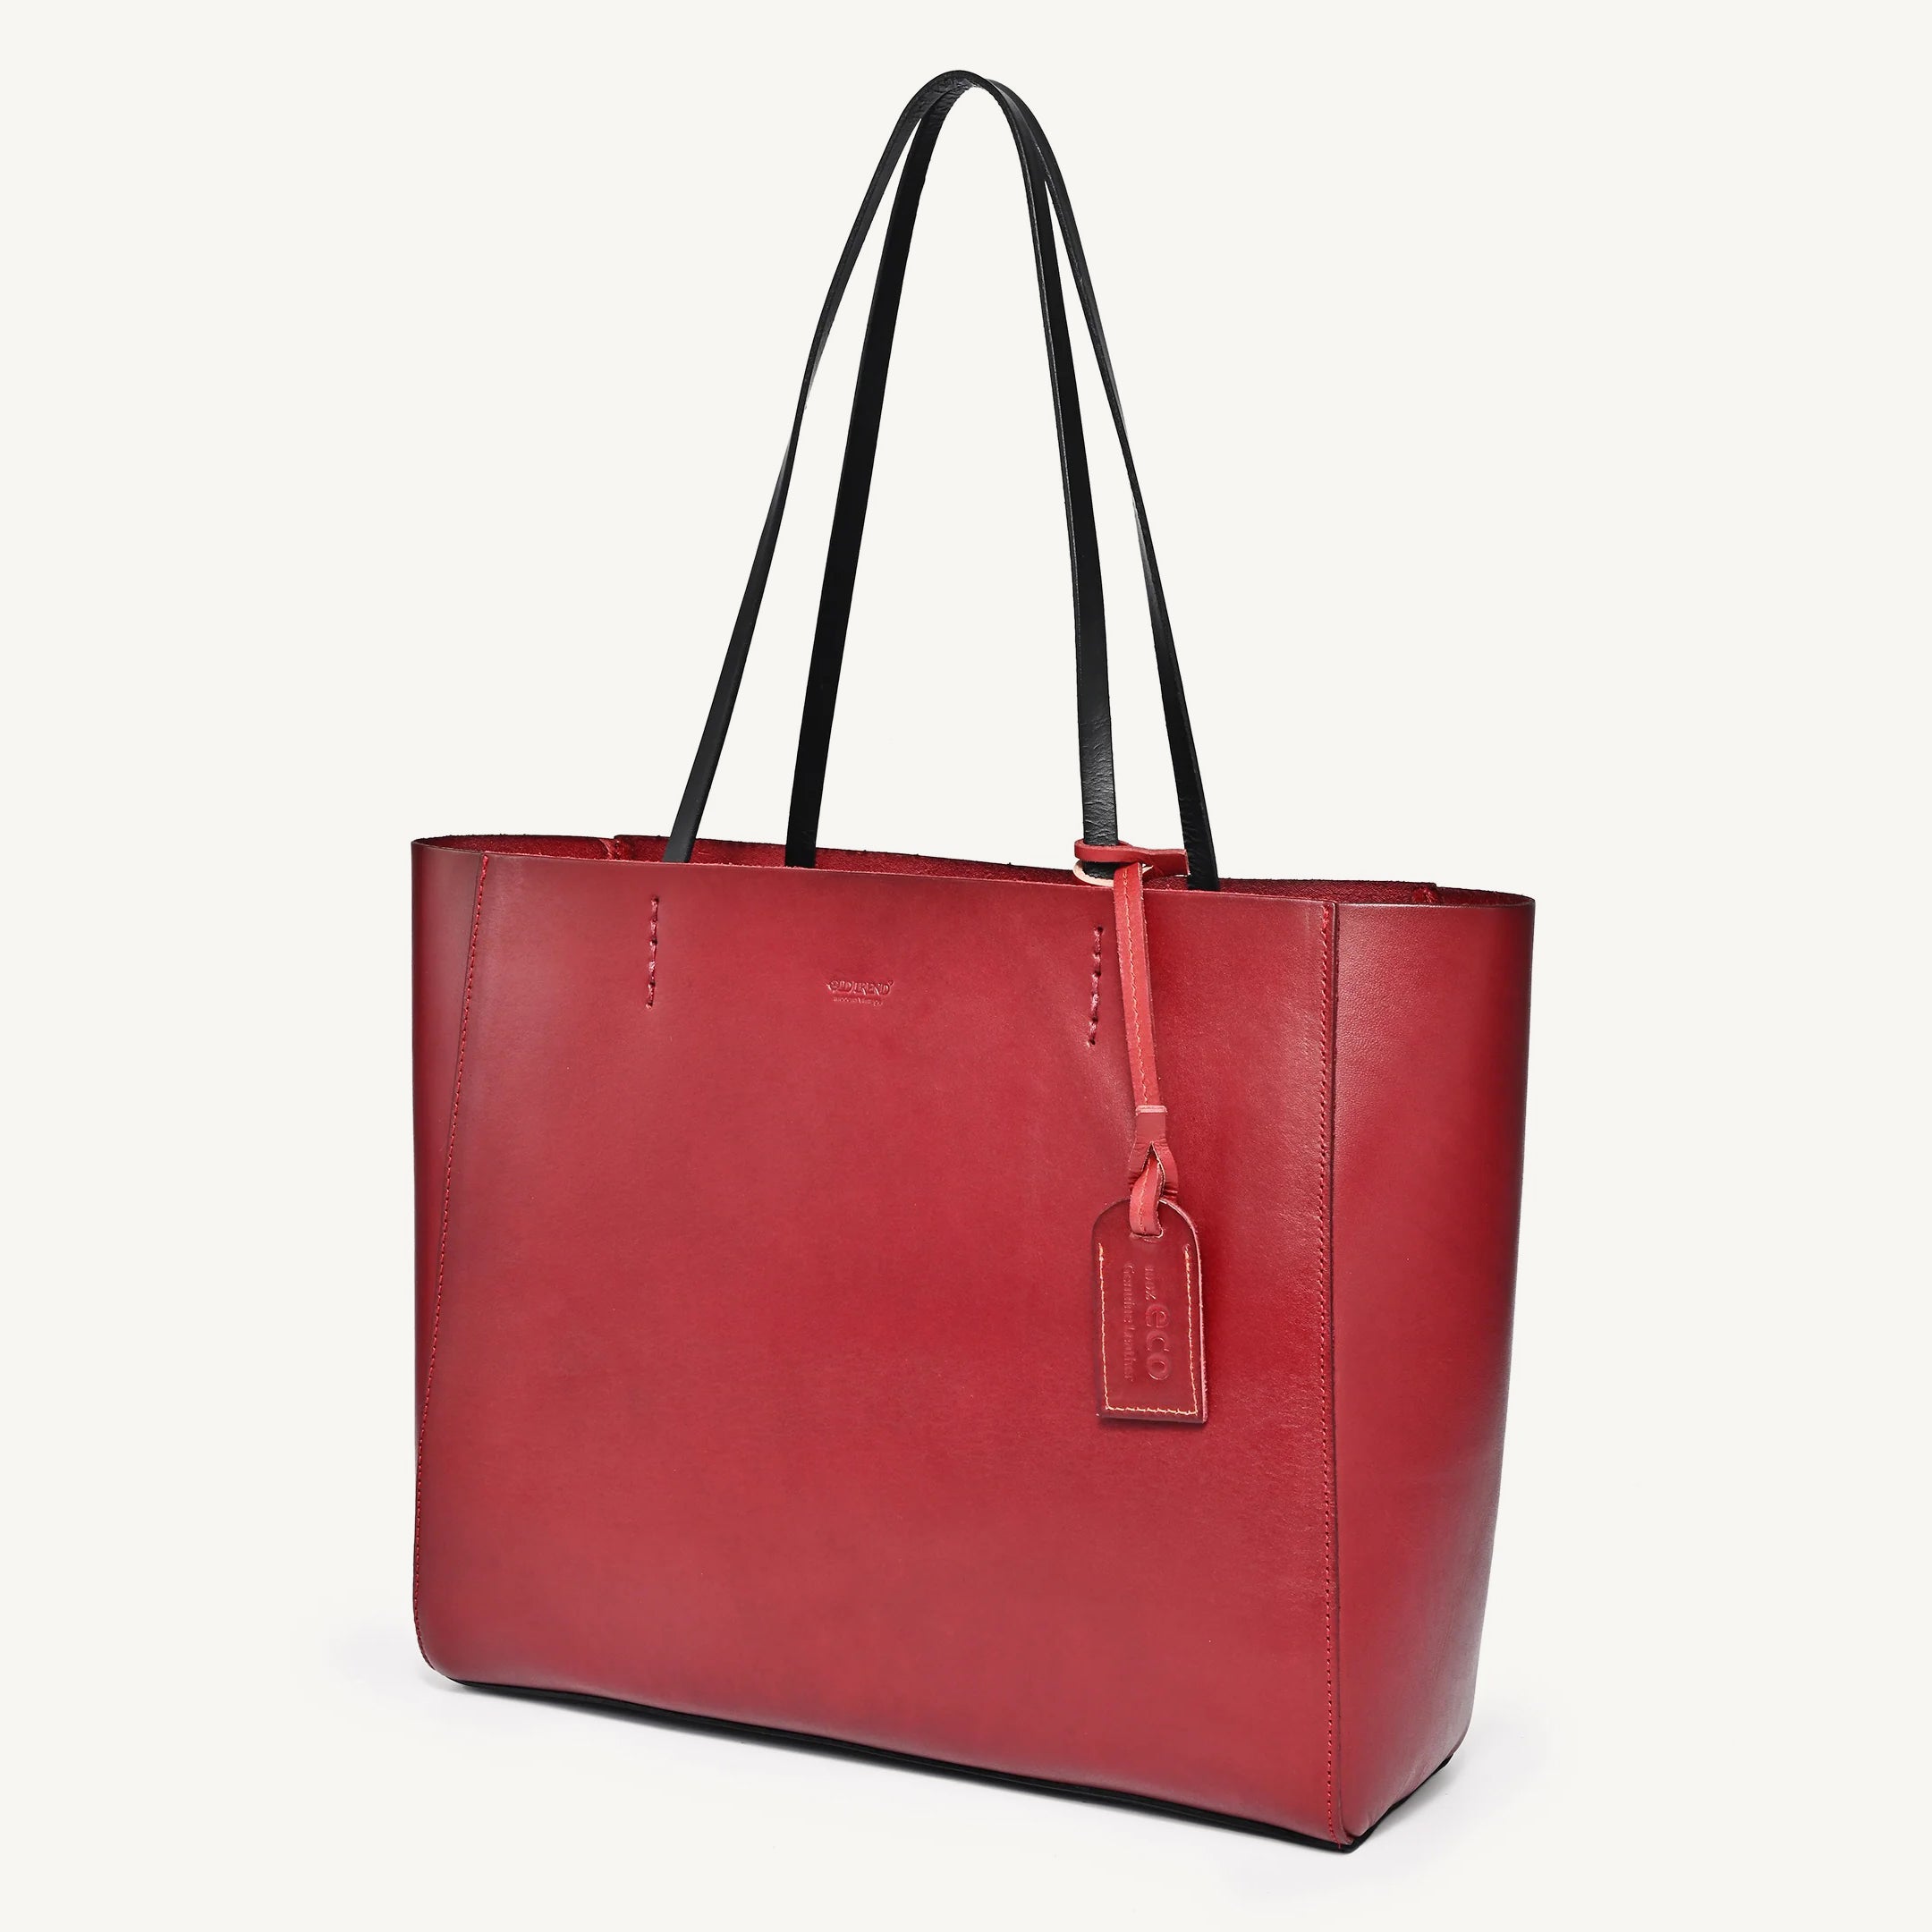 Leather Bags & Purses | American Leather Co.